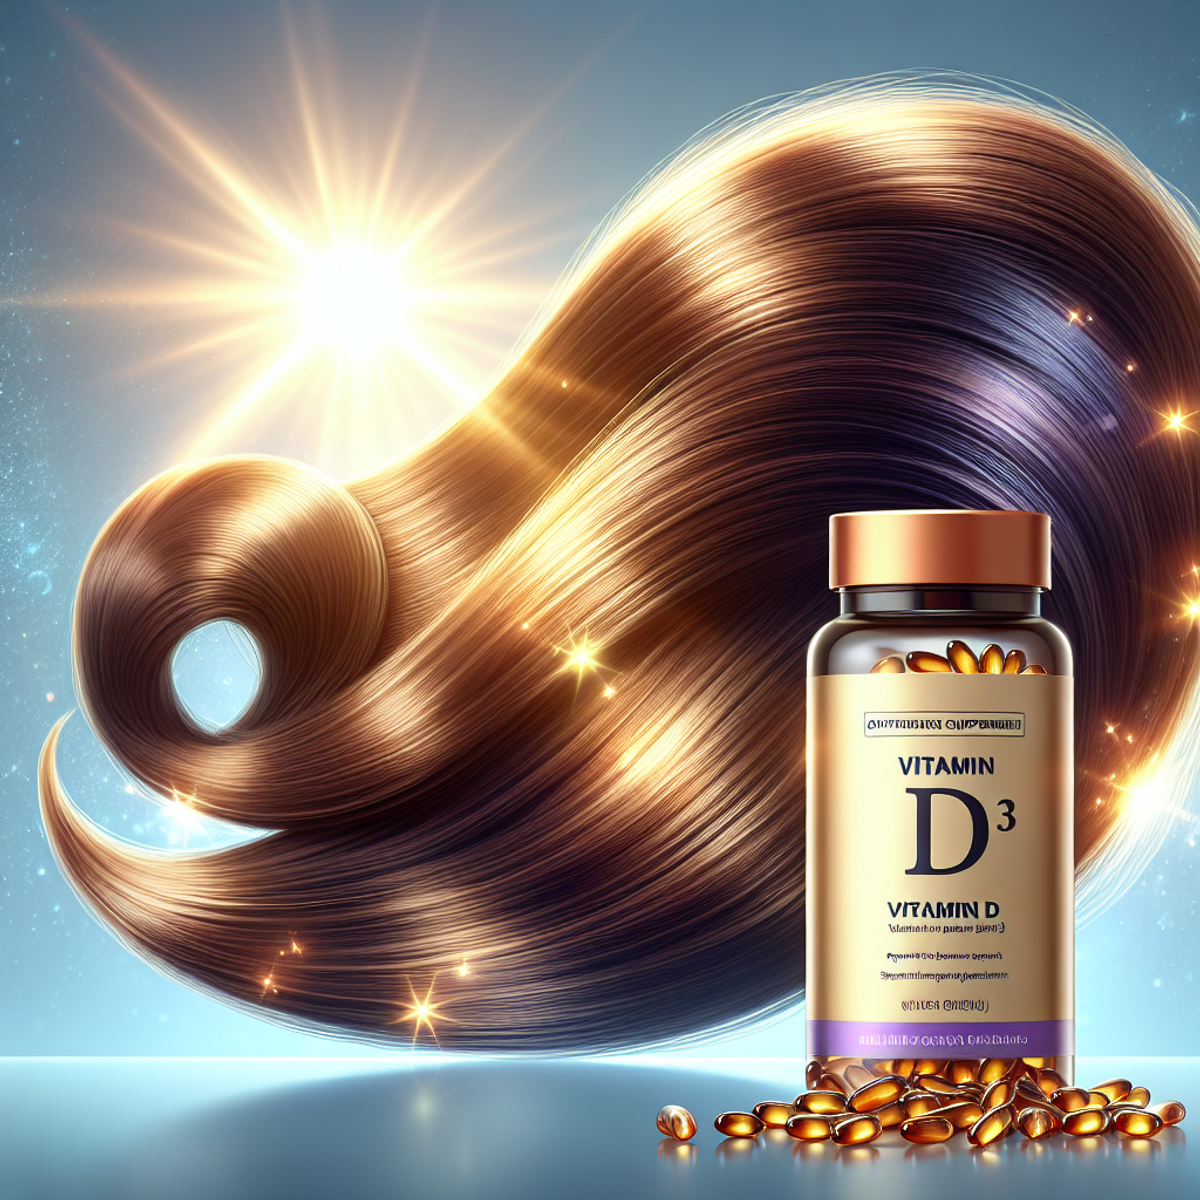 A strand of hair basking in sunlight with a bottle of Vitamin D3 supplements next to it.